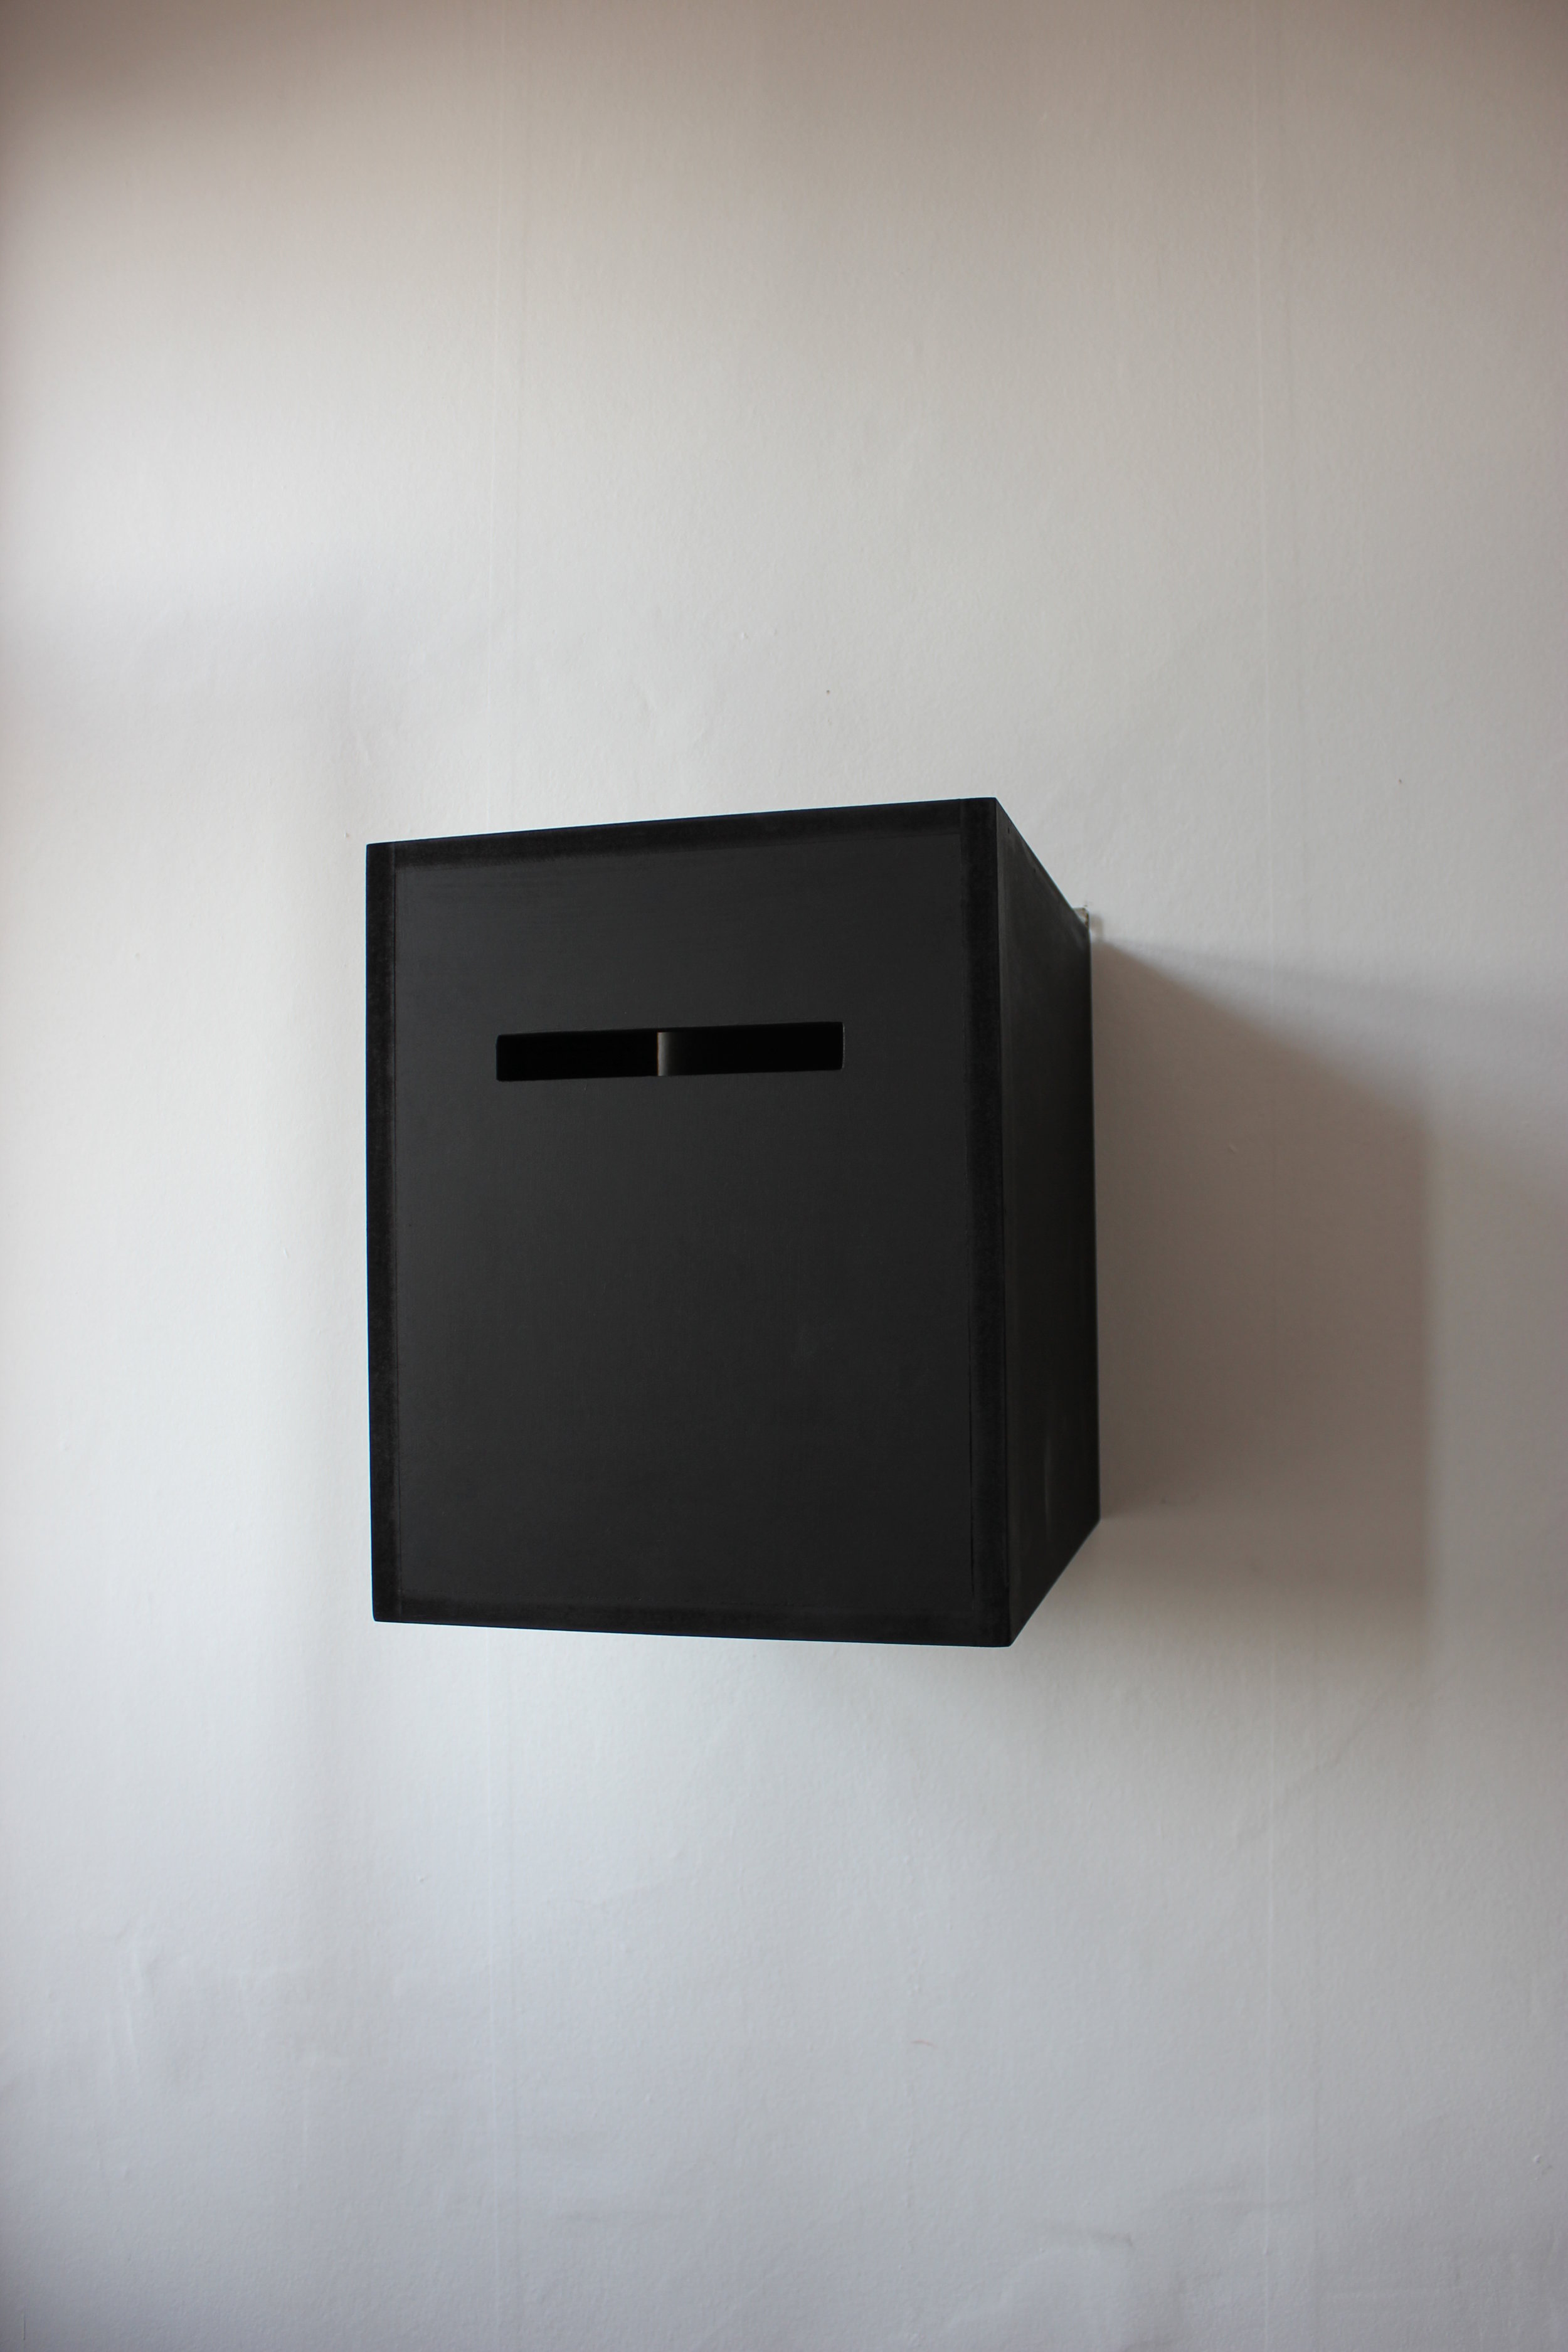  Box of smiling eyes, 2014.&nbsp;  31x38x40 cm  Closed painted wooden box with a small peephole to look inside the box and see your own eyes reflecting in a mirror and the word SMILE.    